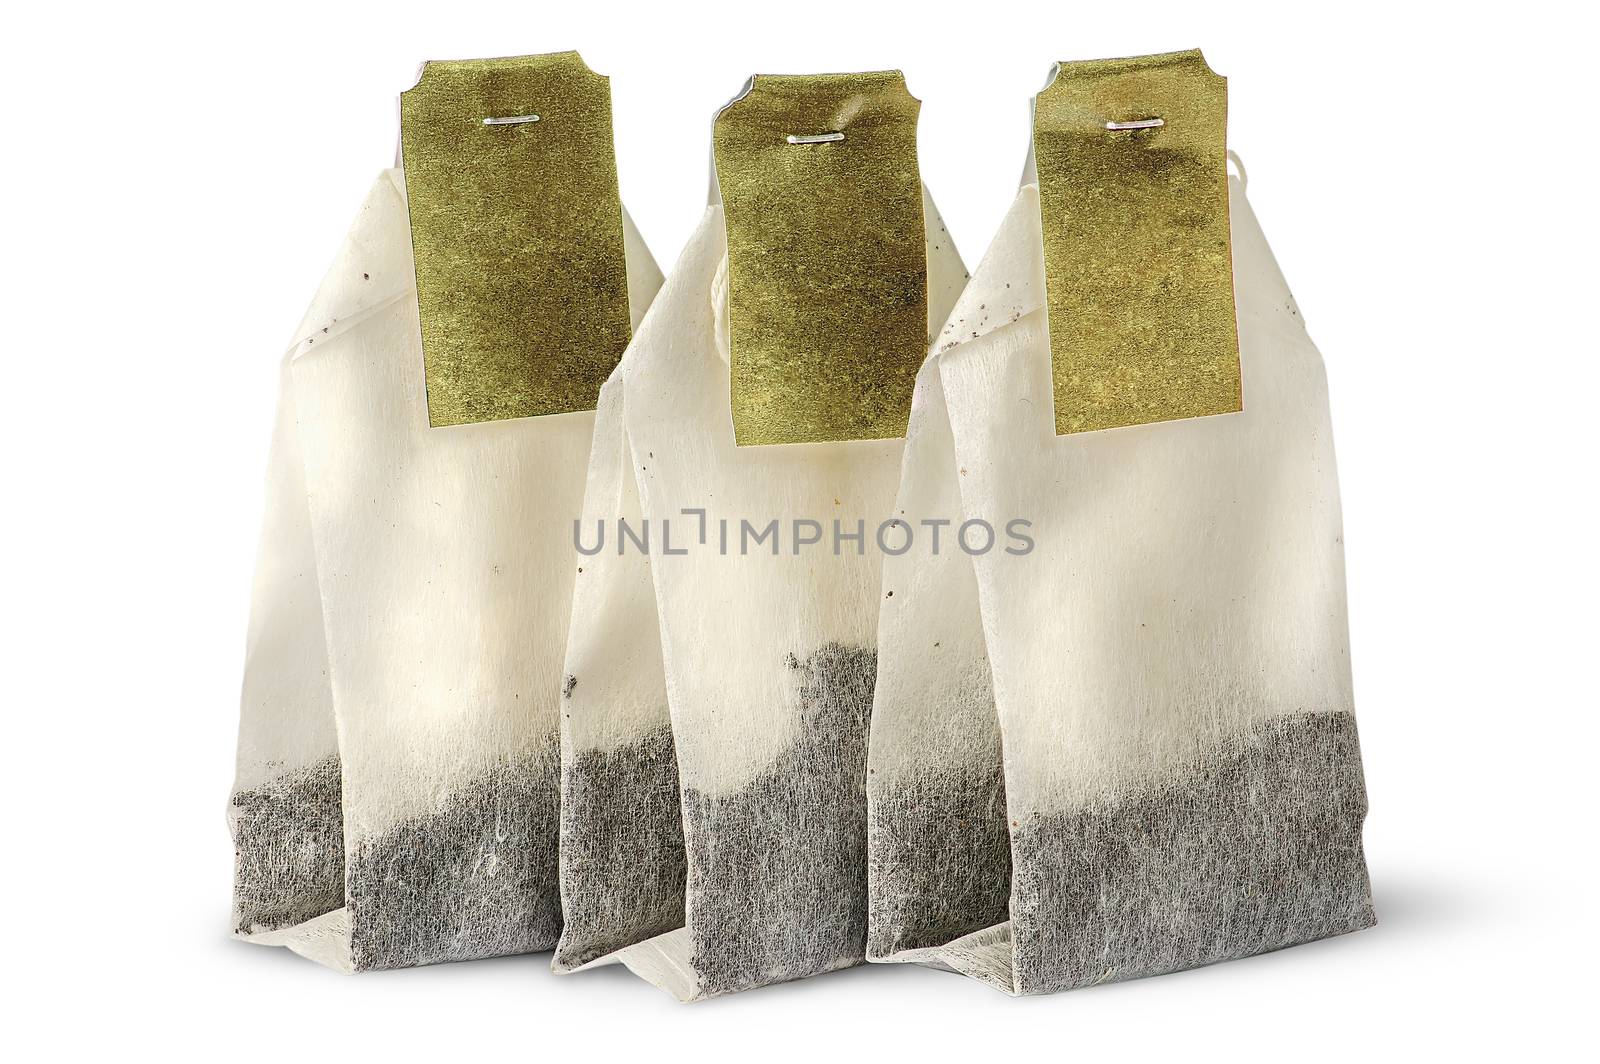 Three tea bags with labels by Cipariss